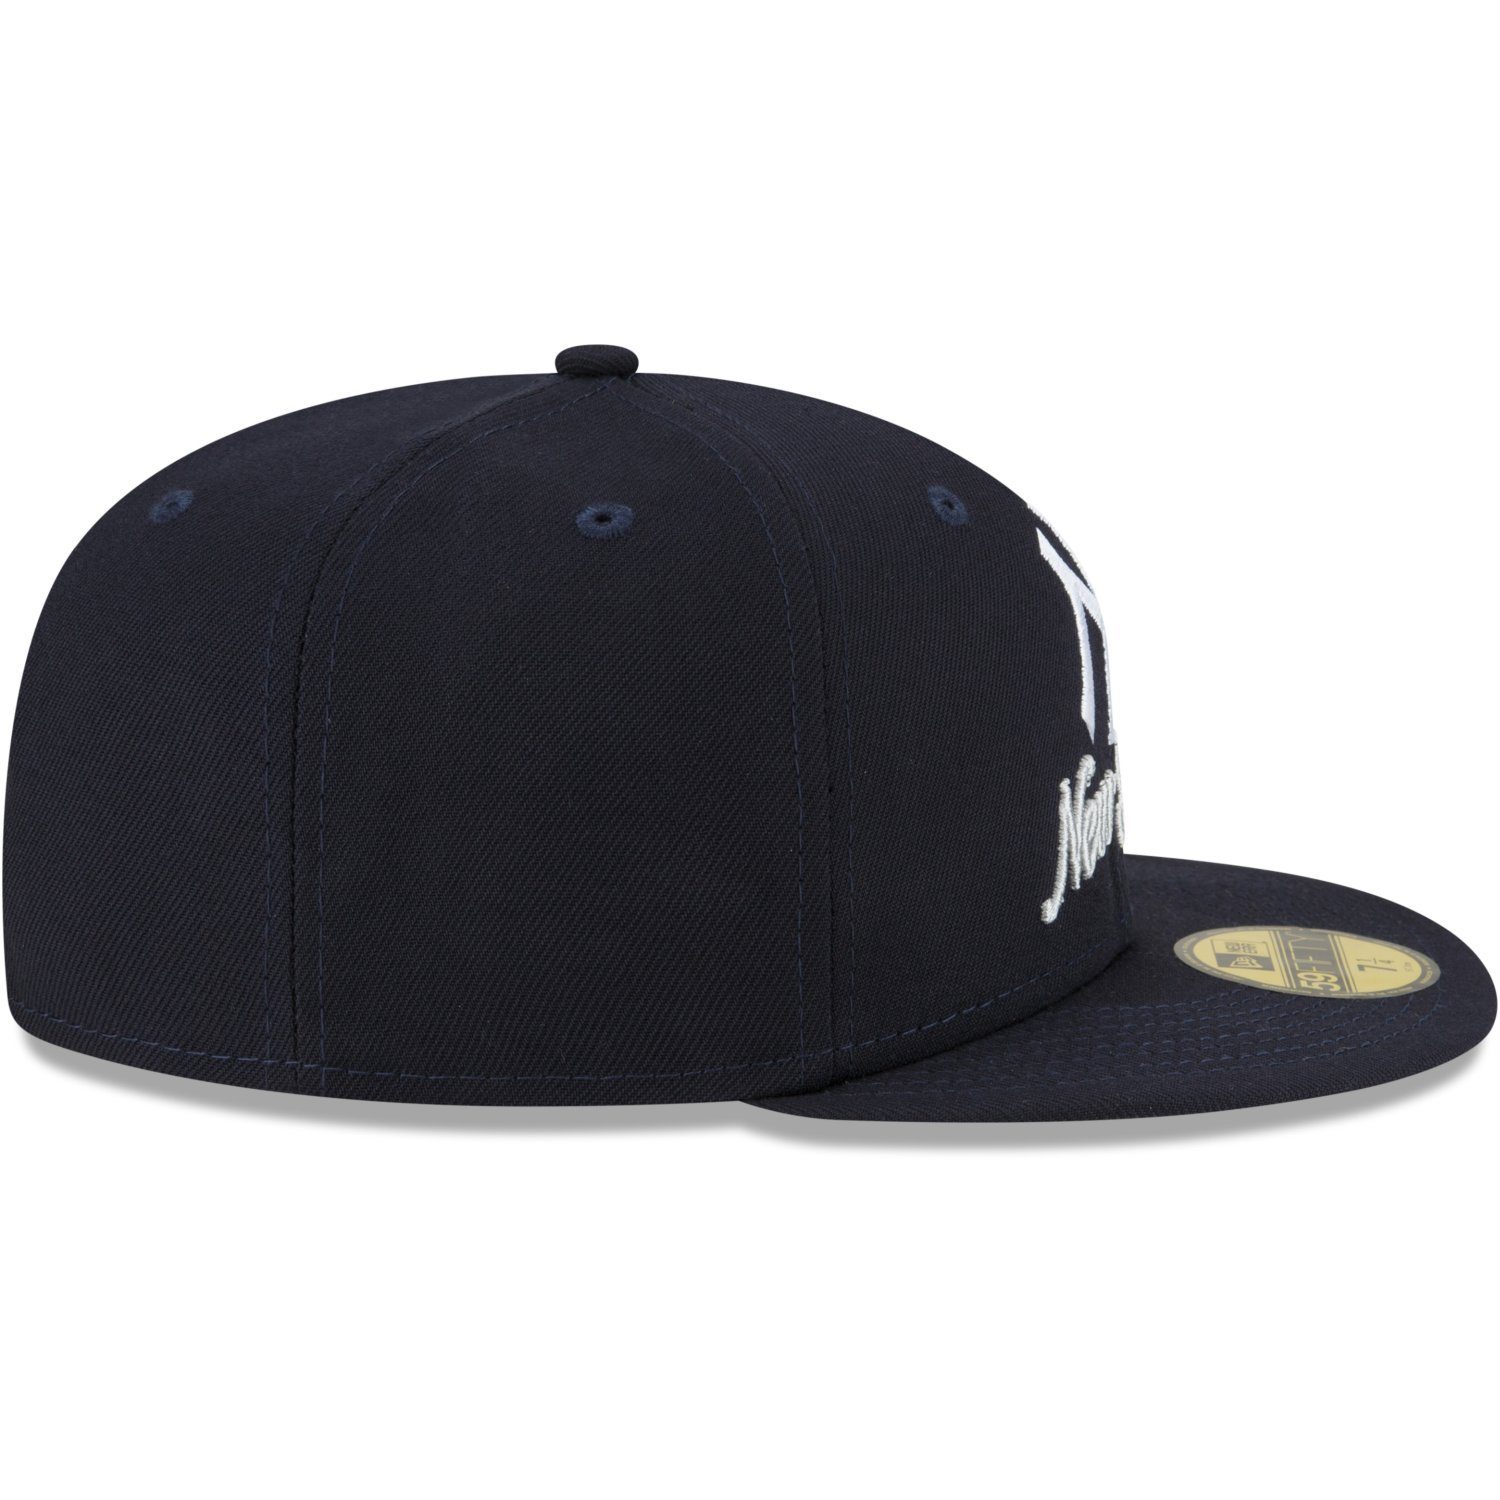 New Era Fitted Cap York DUAL LOGO 59Fifty New Yankees